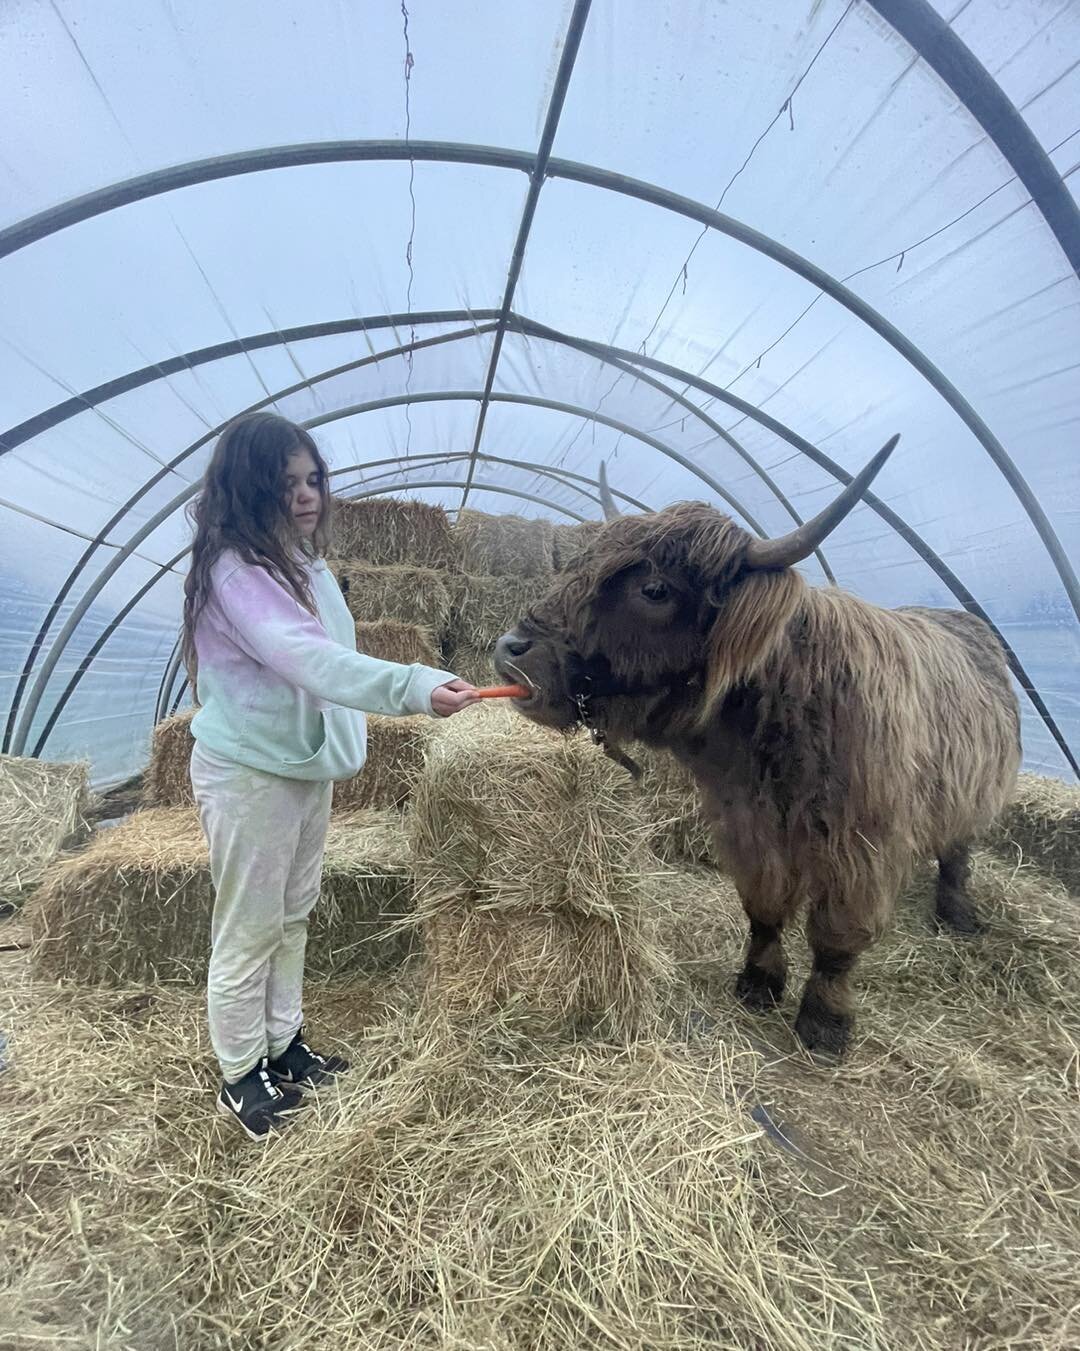 Did someone say Furry Photos??? Here&rsquo;s a sneak peek 👀 of what we have up our sleeve! Coco the young Scottish Highland Cow (well technically she&rsquo;s a heifer because she hasn&rsquo;t 
been a mama yet). Could you imagine having an experience